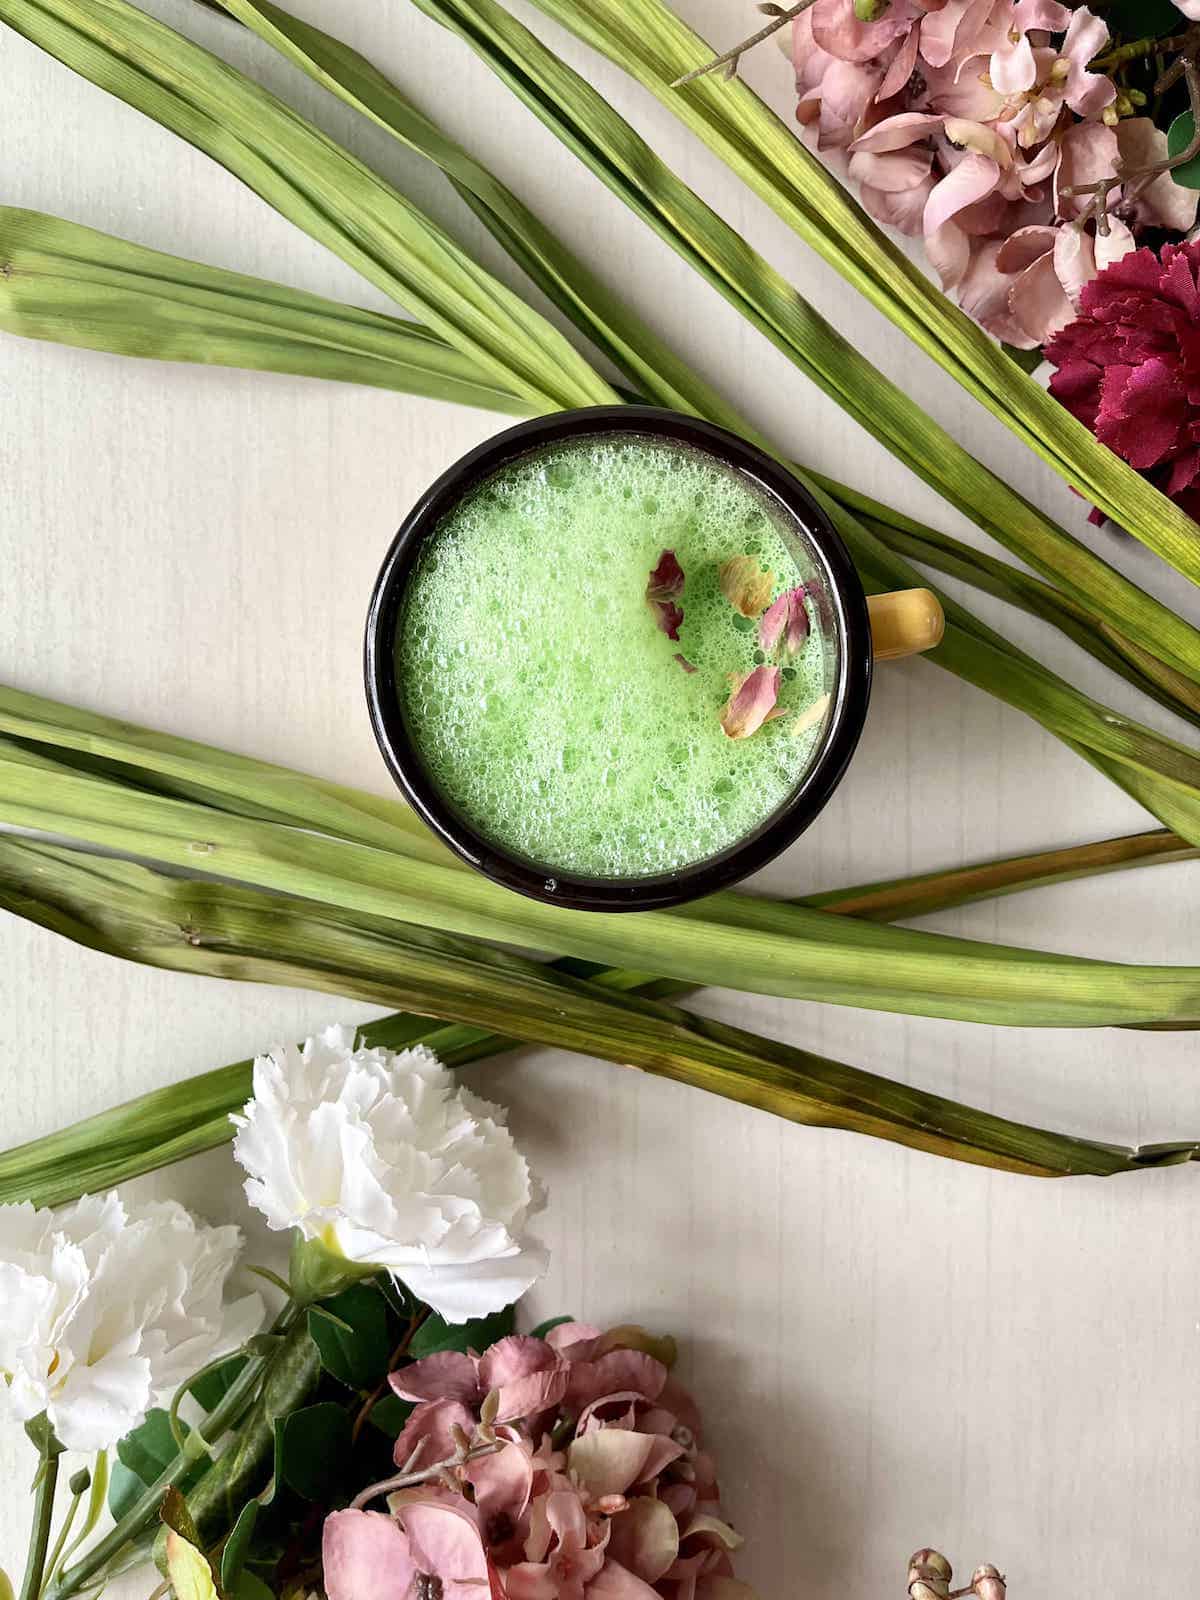 Pandan latte with flowers in the background.